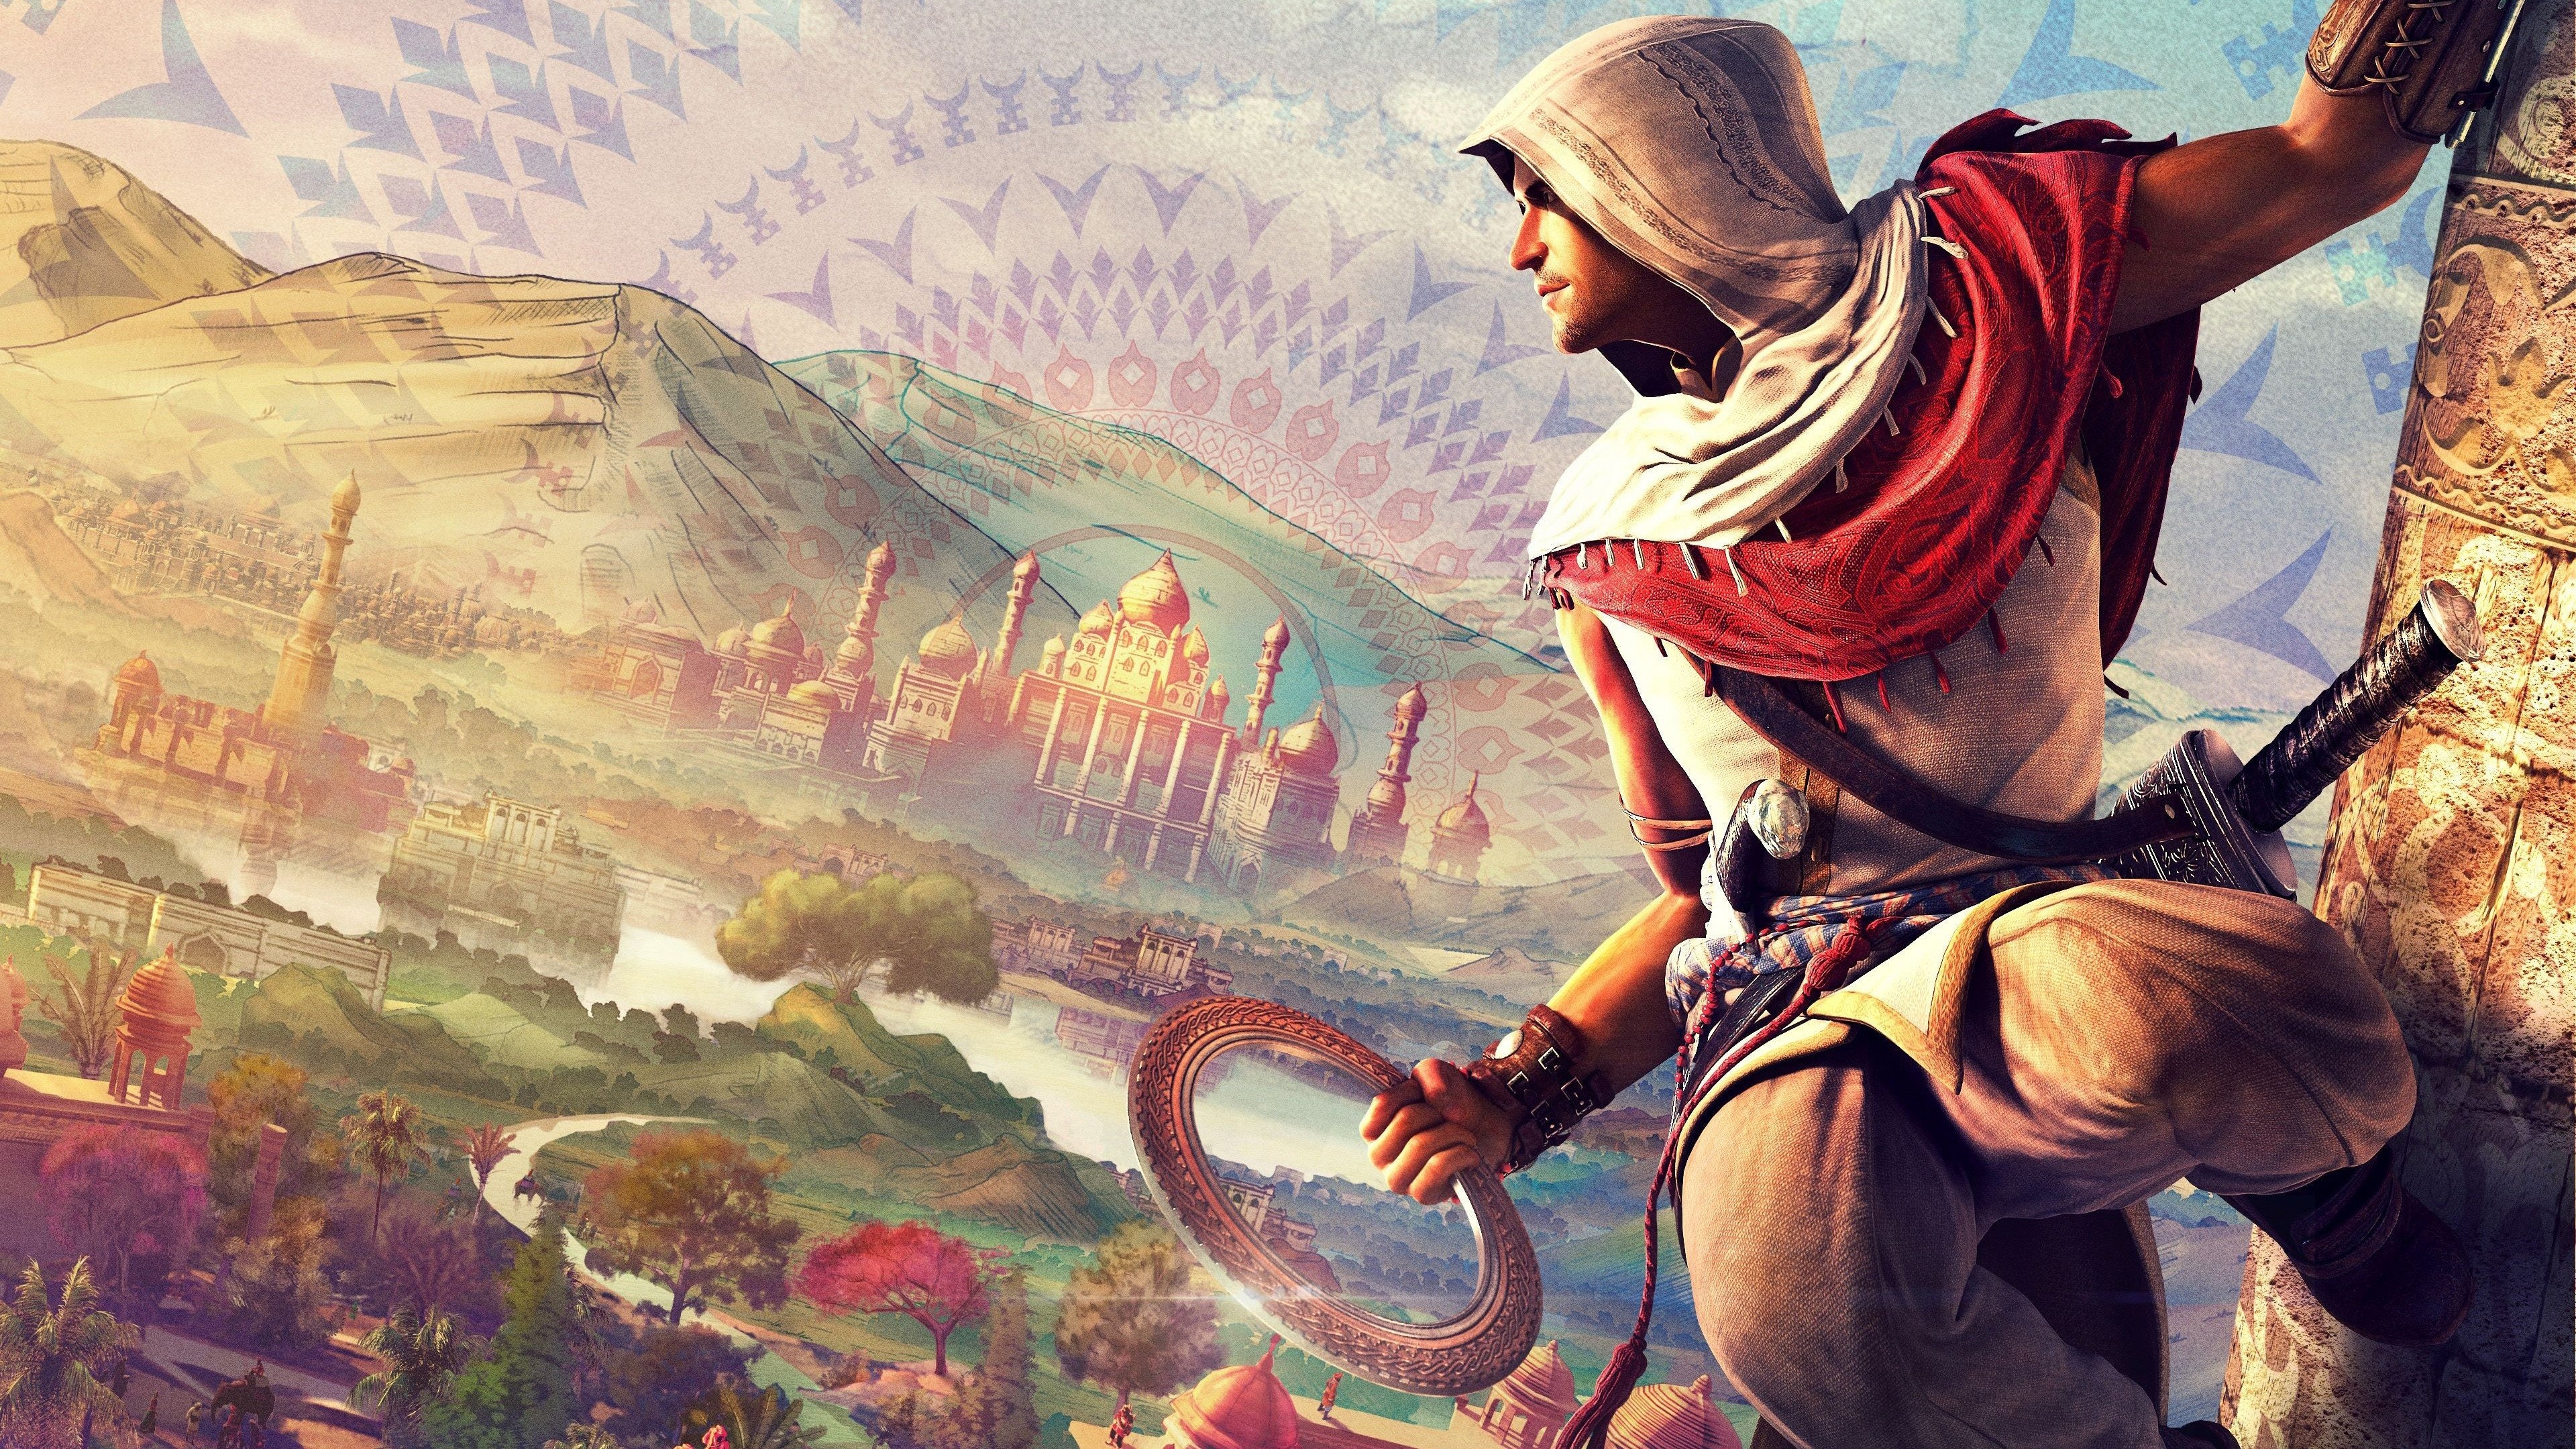 Wallpaper Assassin's Creed Chronicles Trilogy, Best Games, game, arcade,  sci-fi, India, PC, PS4, Xbox One, Games #9418